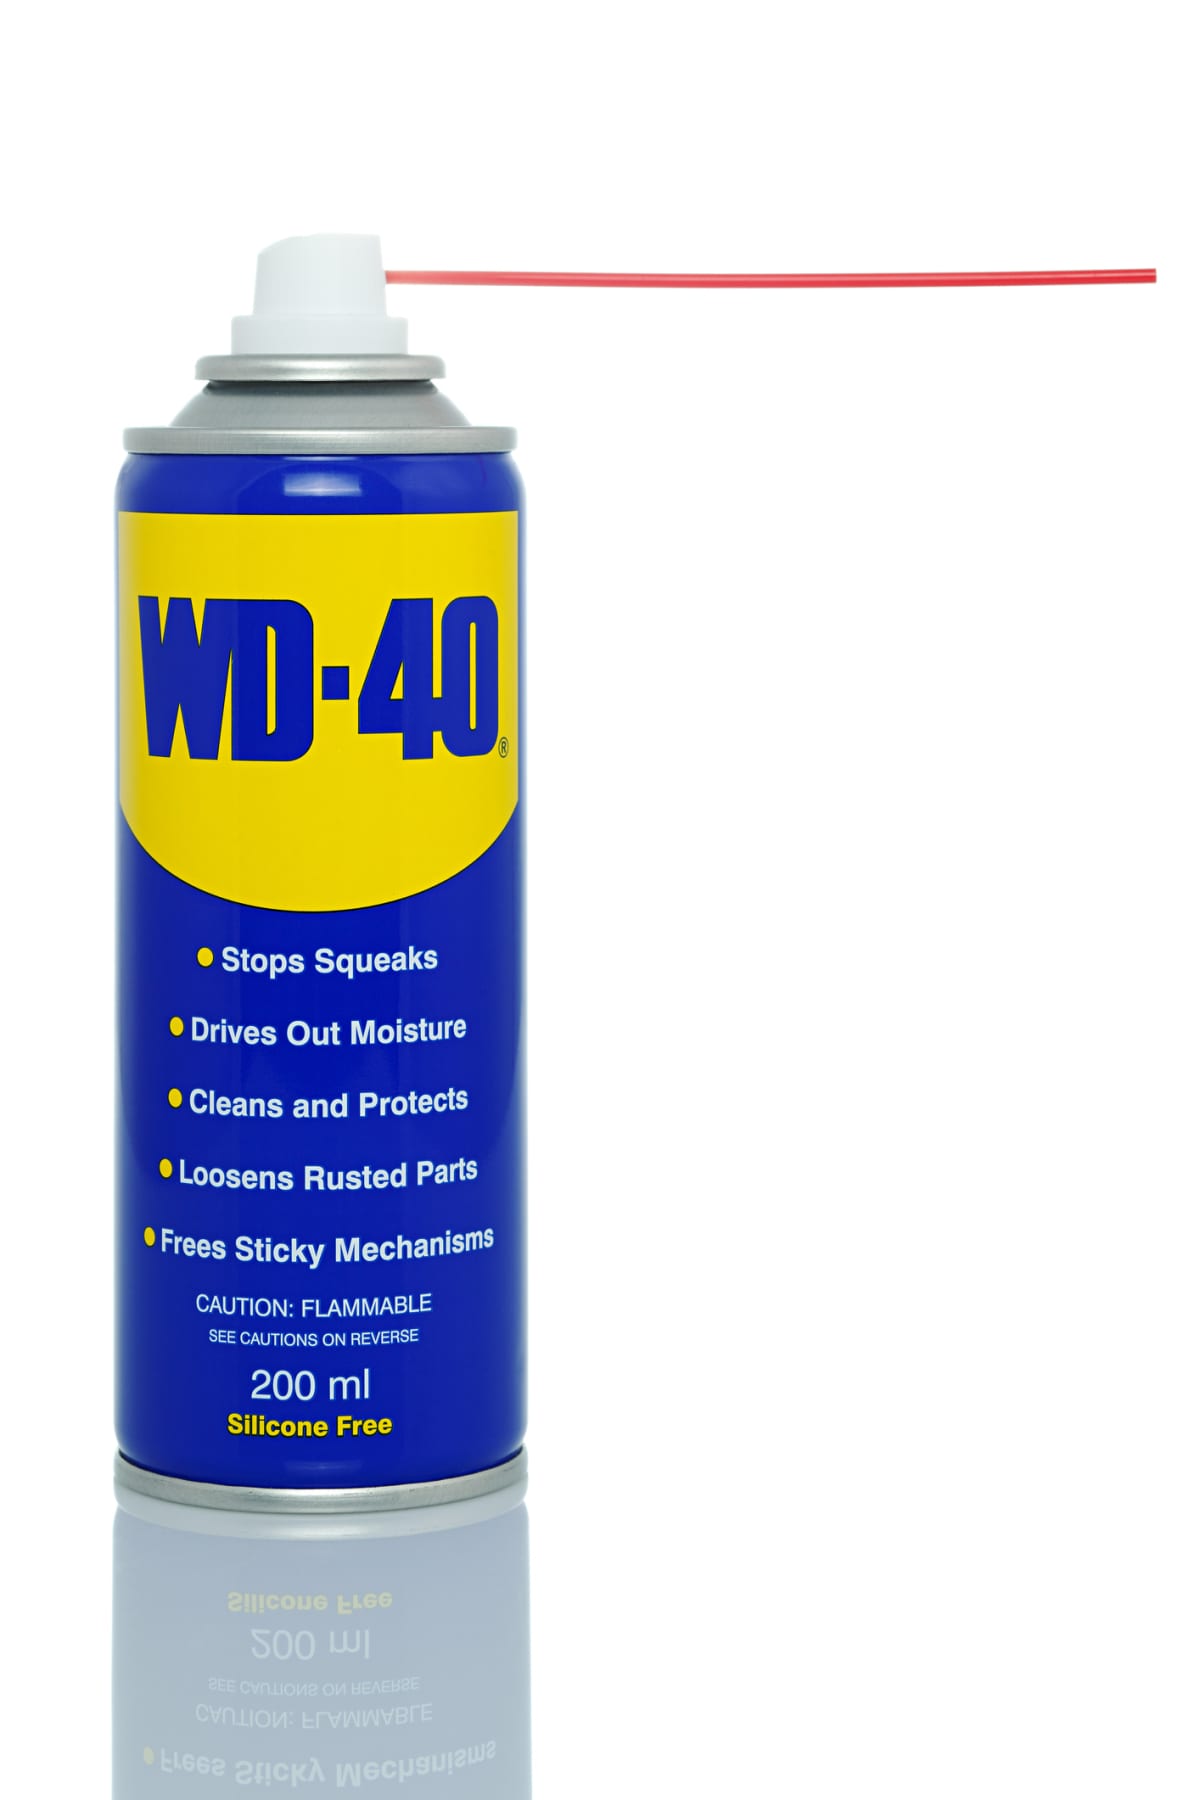 A can of WD-40.